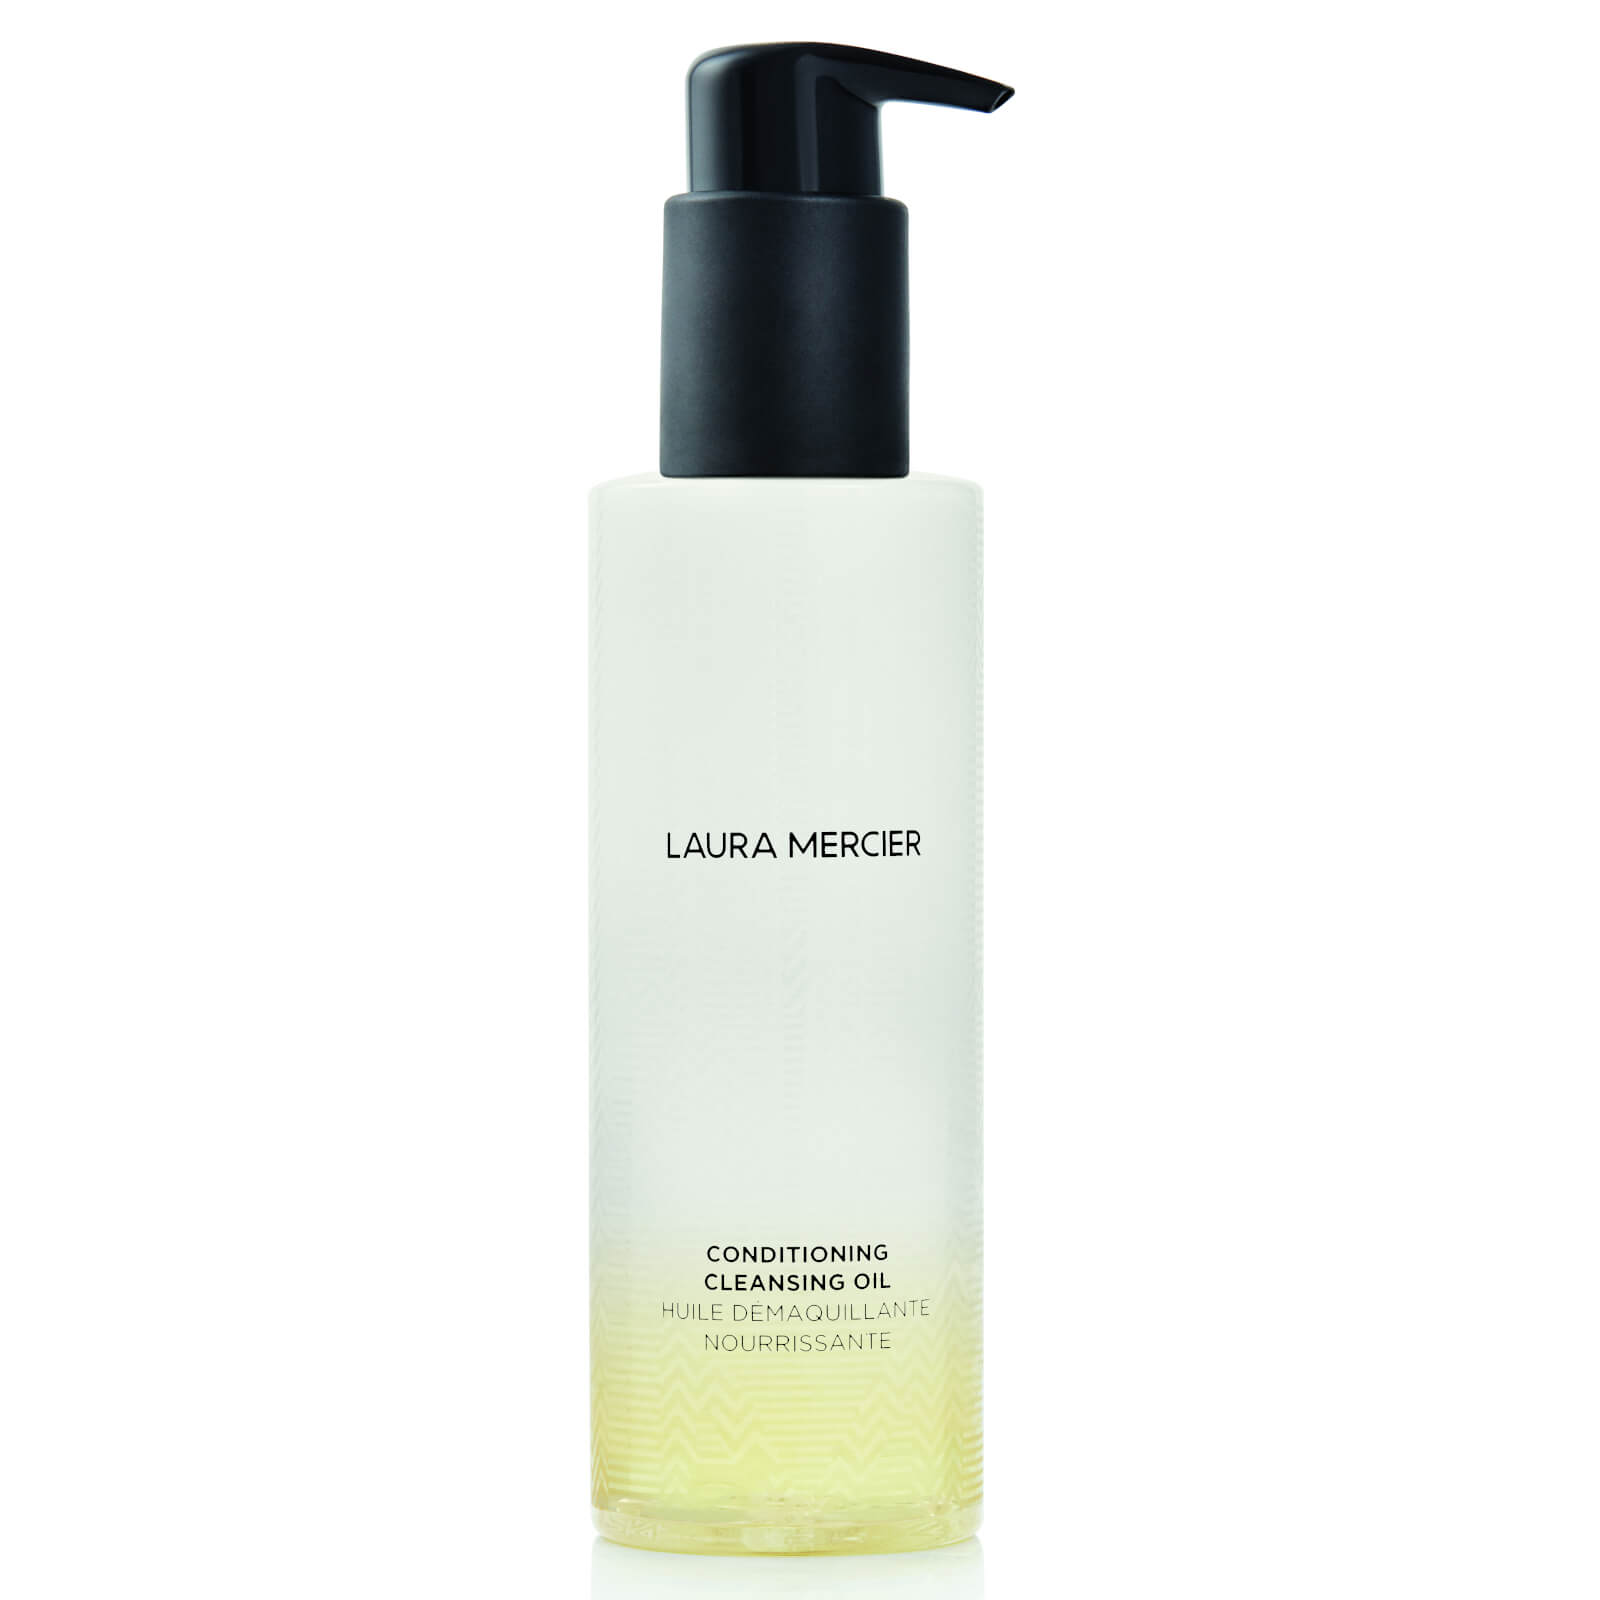 Photos - Facial / Body Cleansing Product Laura Mercier Cleansing Oil 150ml 